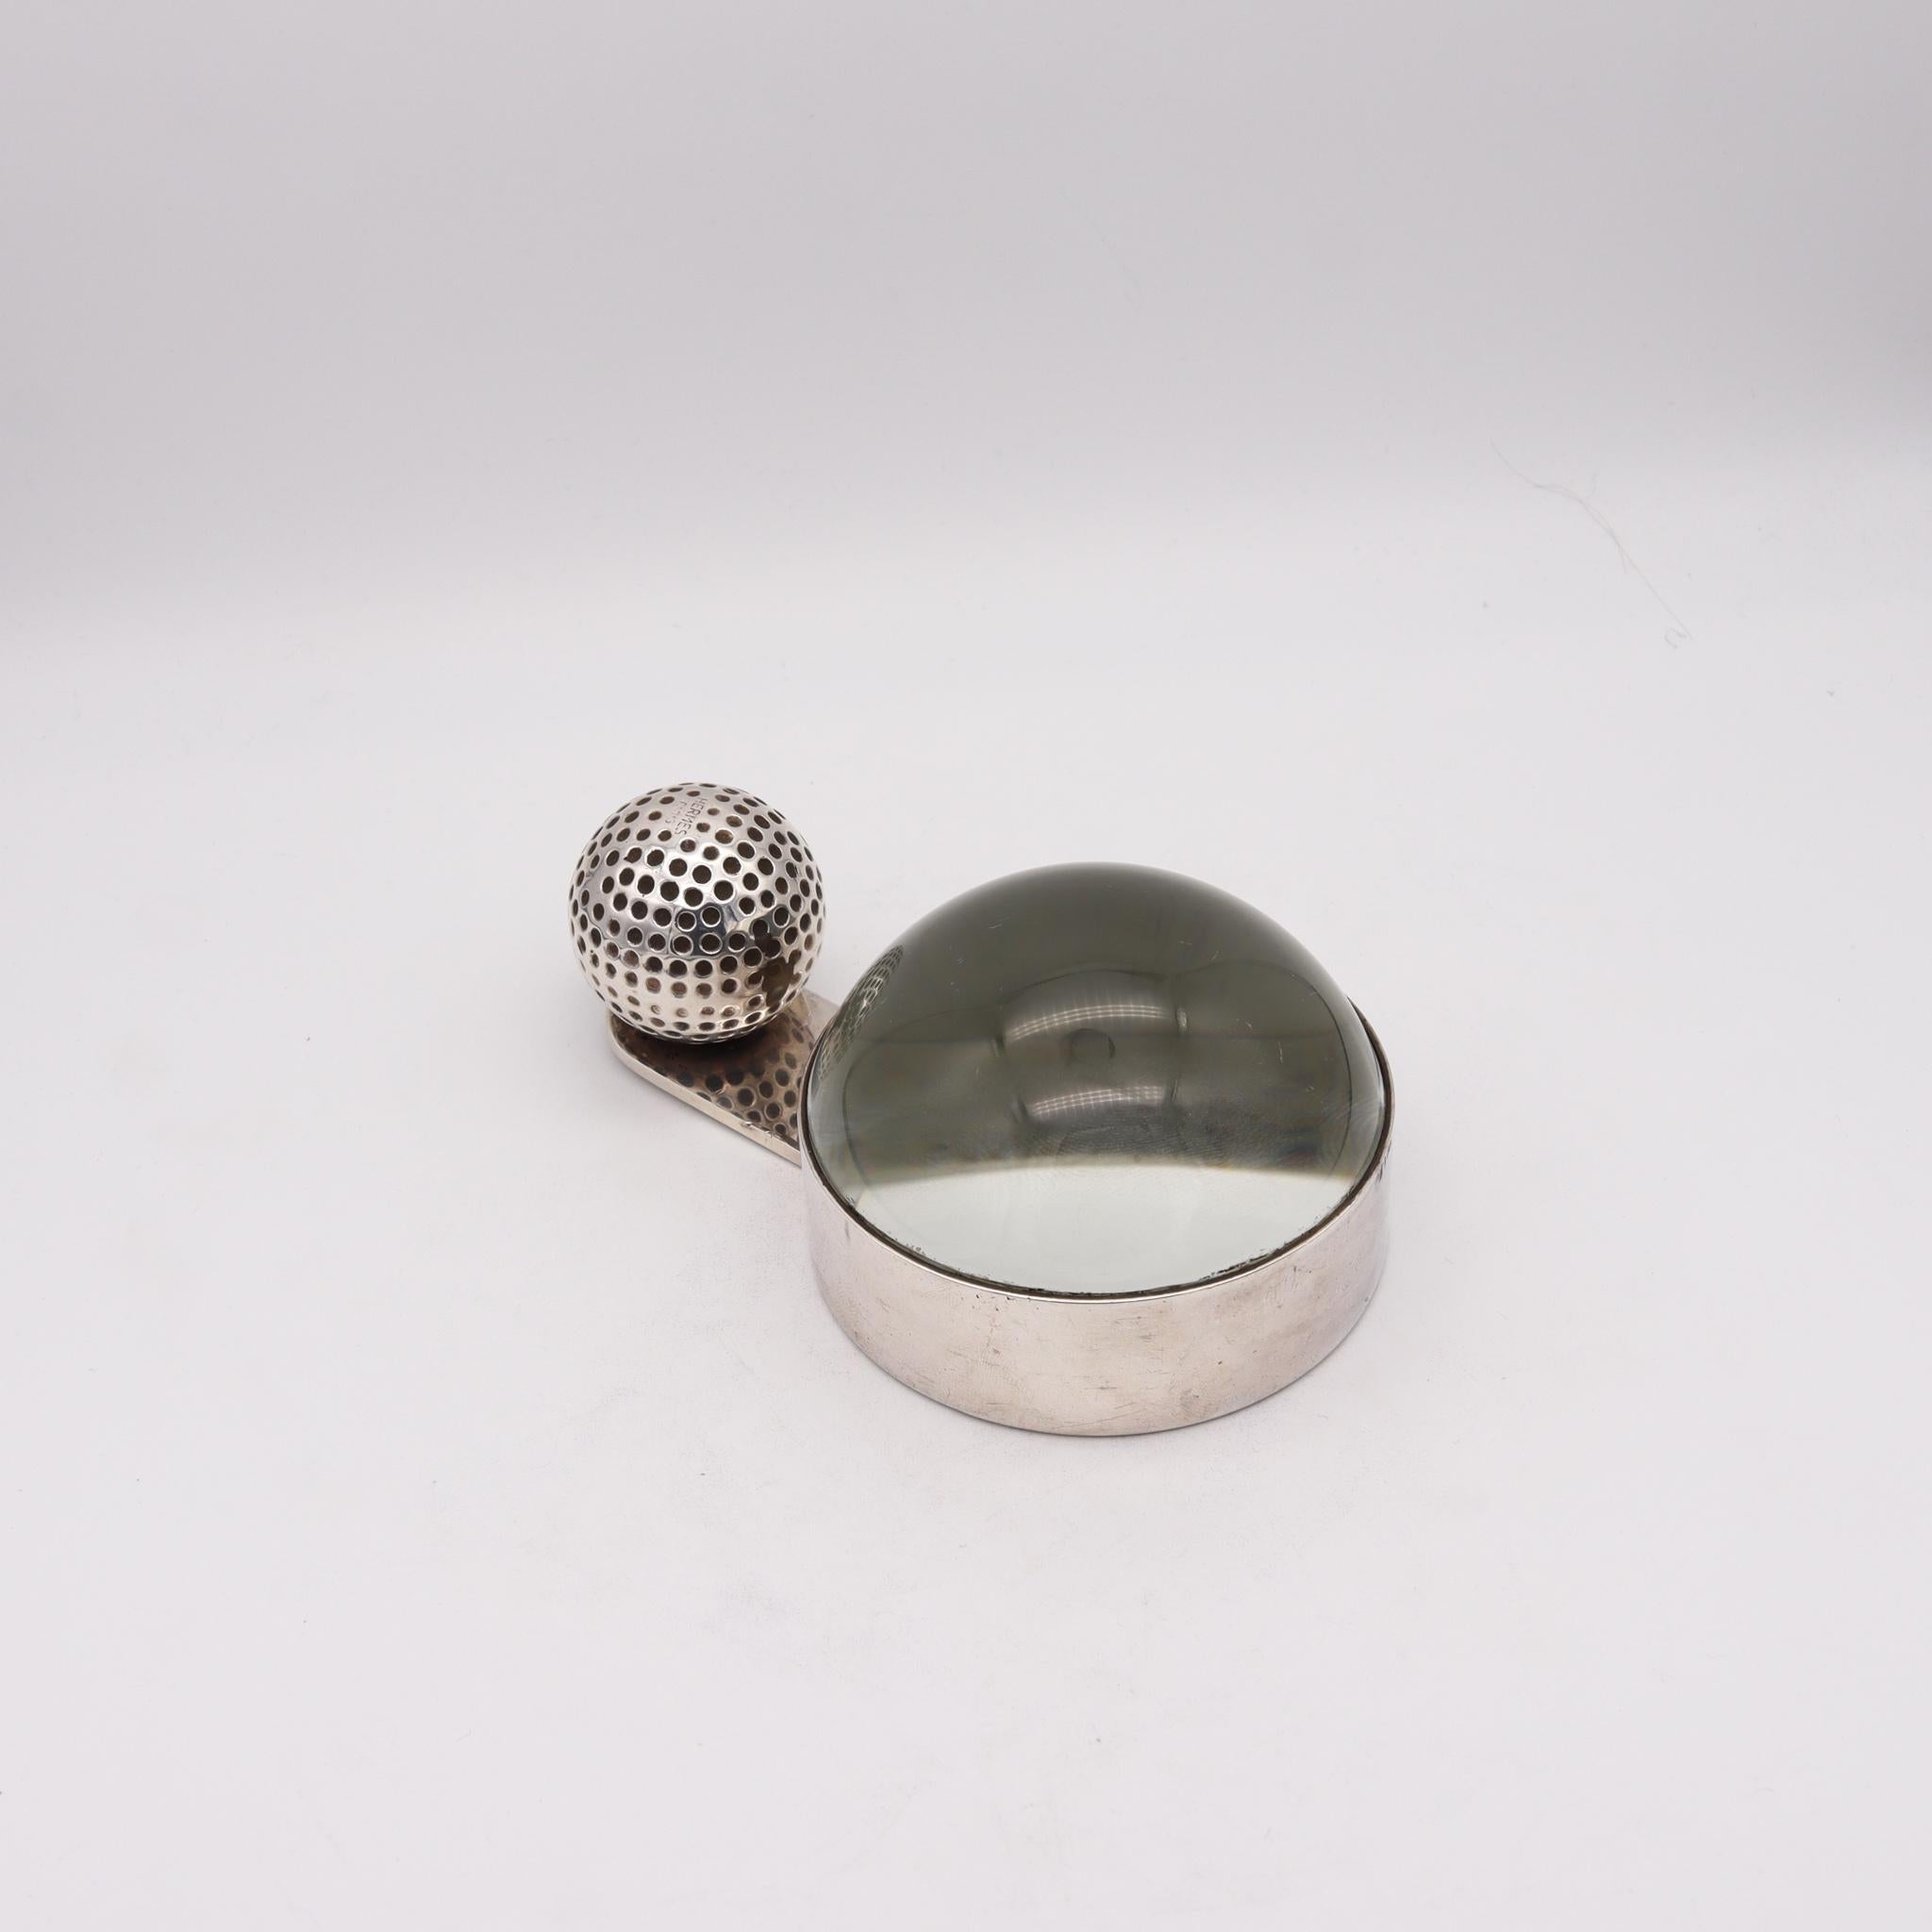 Desk magnifier glass designed by Hermes.

Fabulous and highly decorative piece, created in Paris, France by the house of Hermes, back in the 1960. This useful Golf Ball motif paper weight and magnifier glass is rare and has been carefully crafted